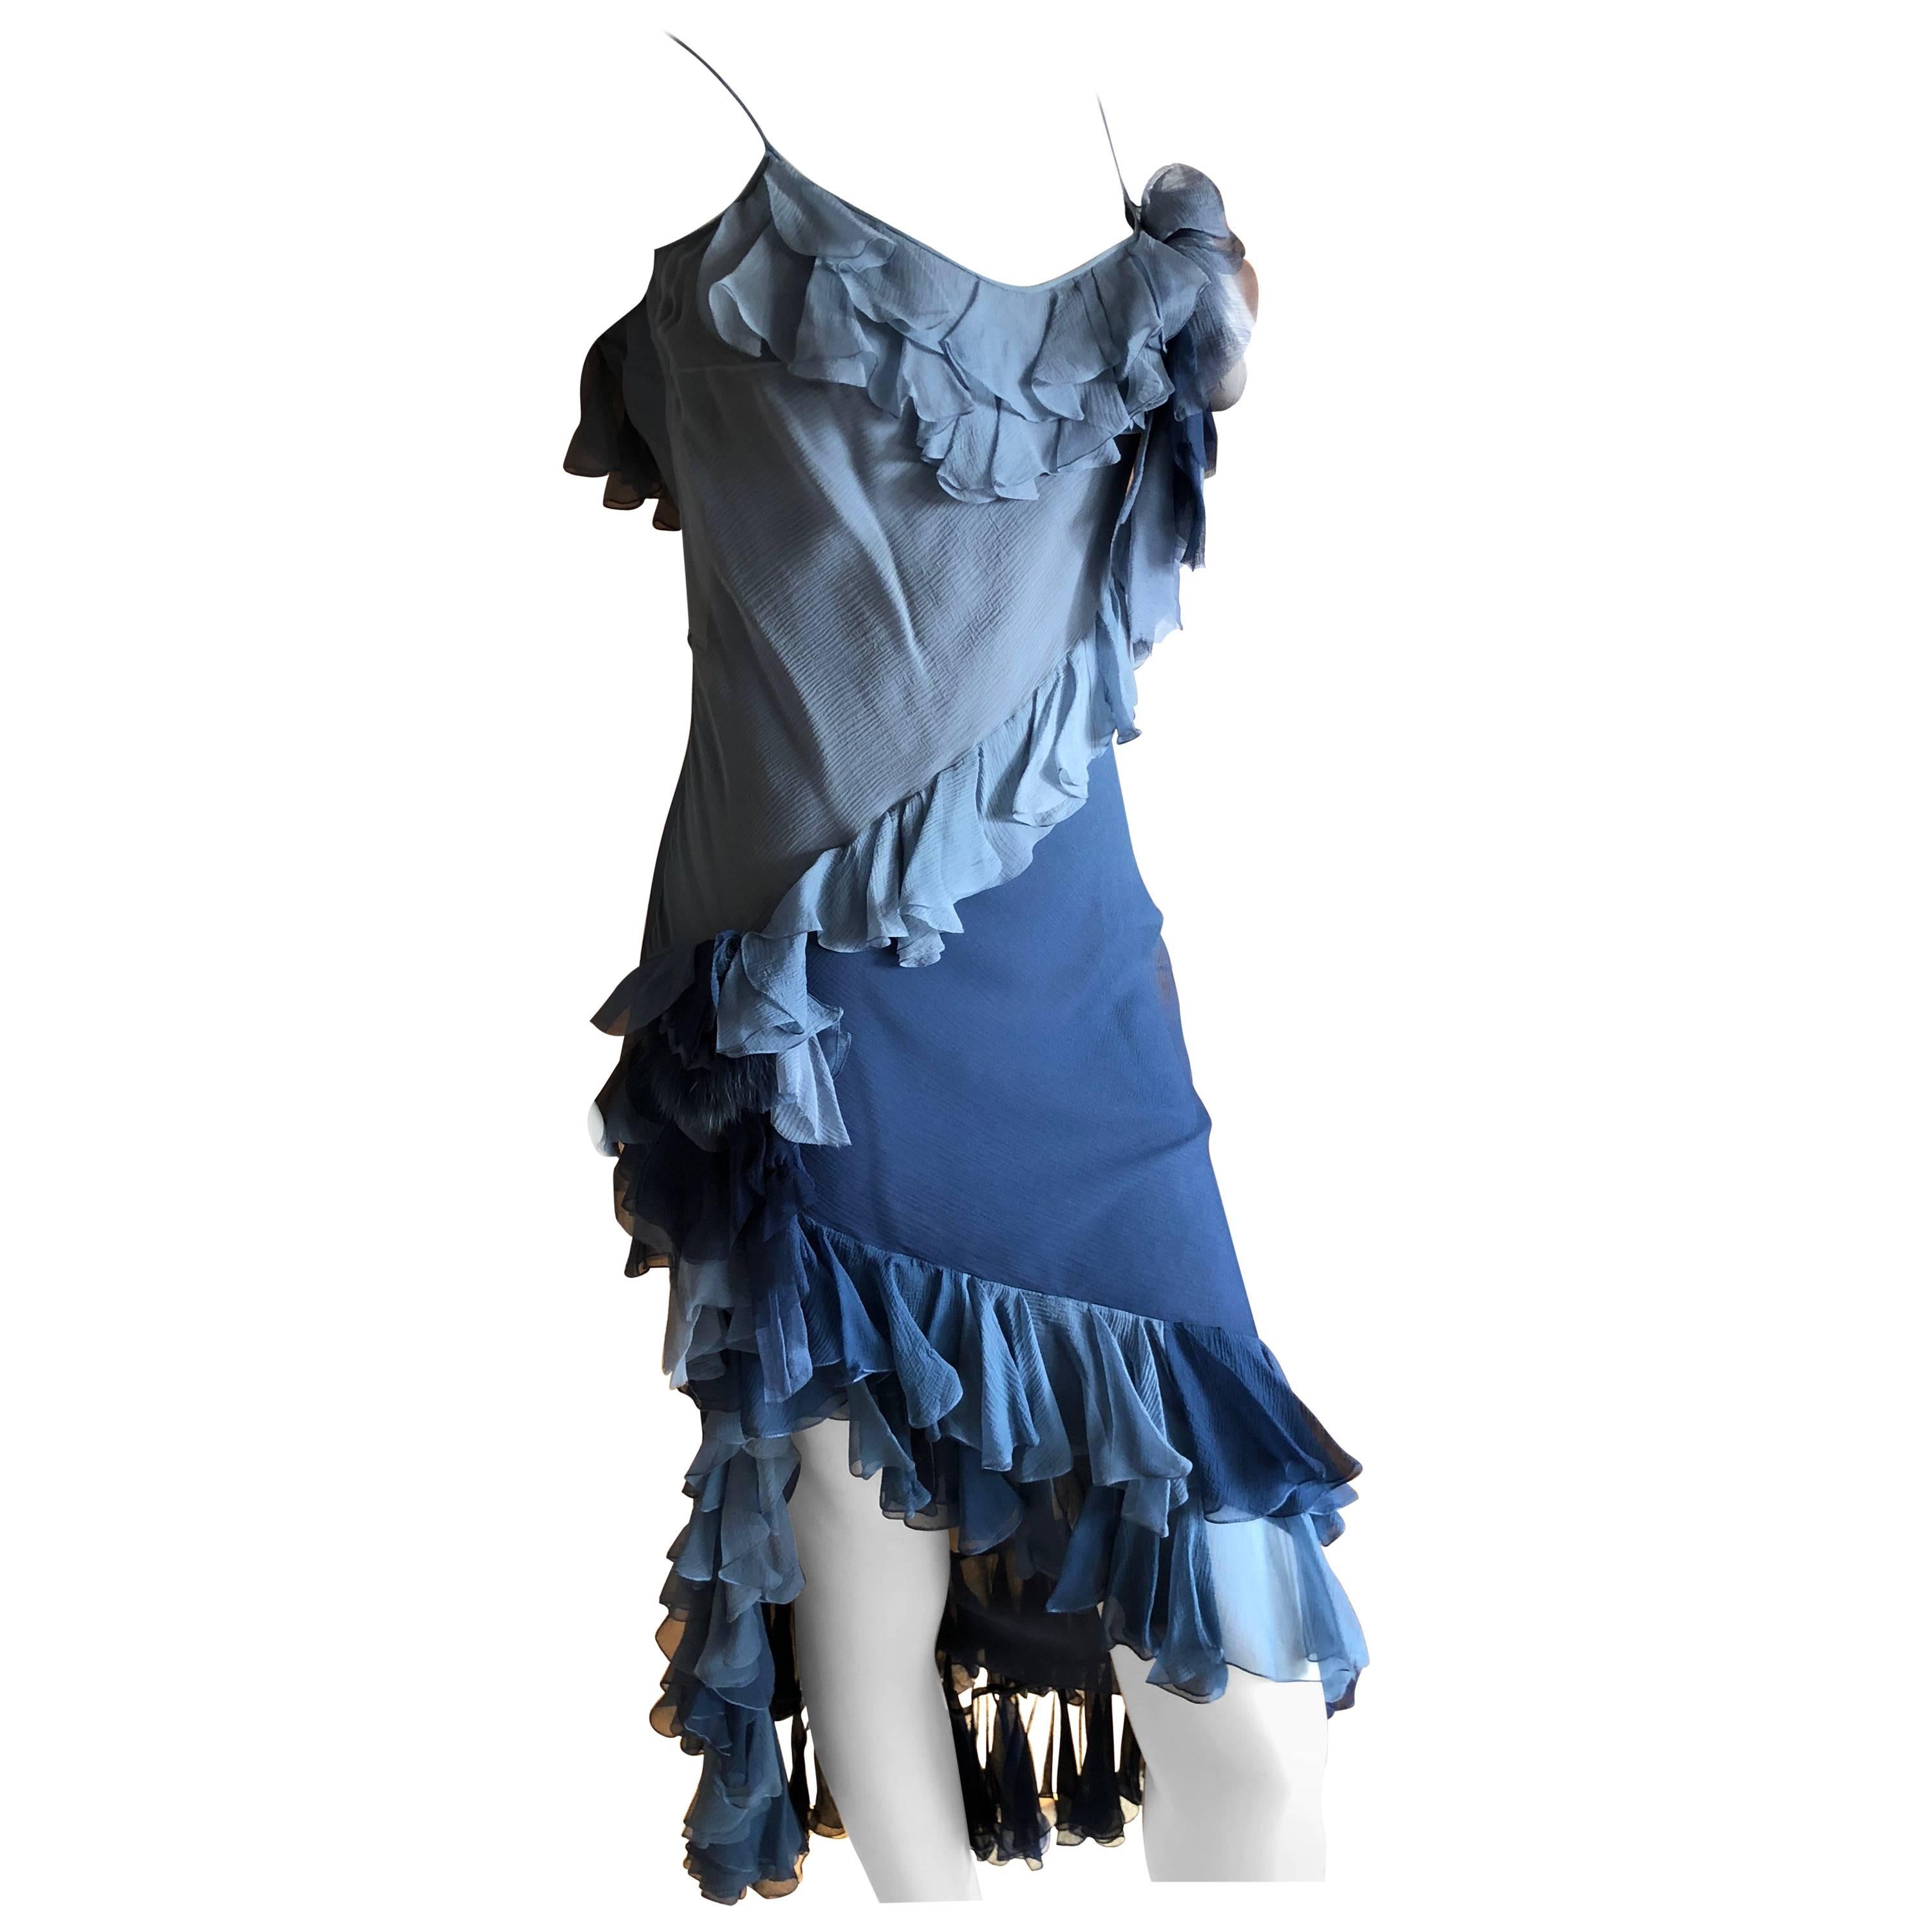 John Galliano 1990's Label Silk Ruffle Ombre Dress with Fur Trim Floral Accents For Sale